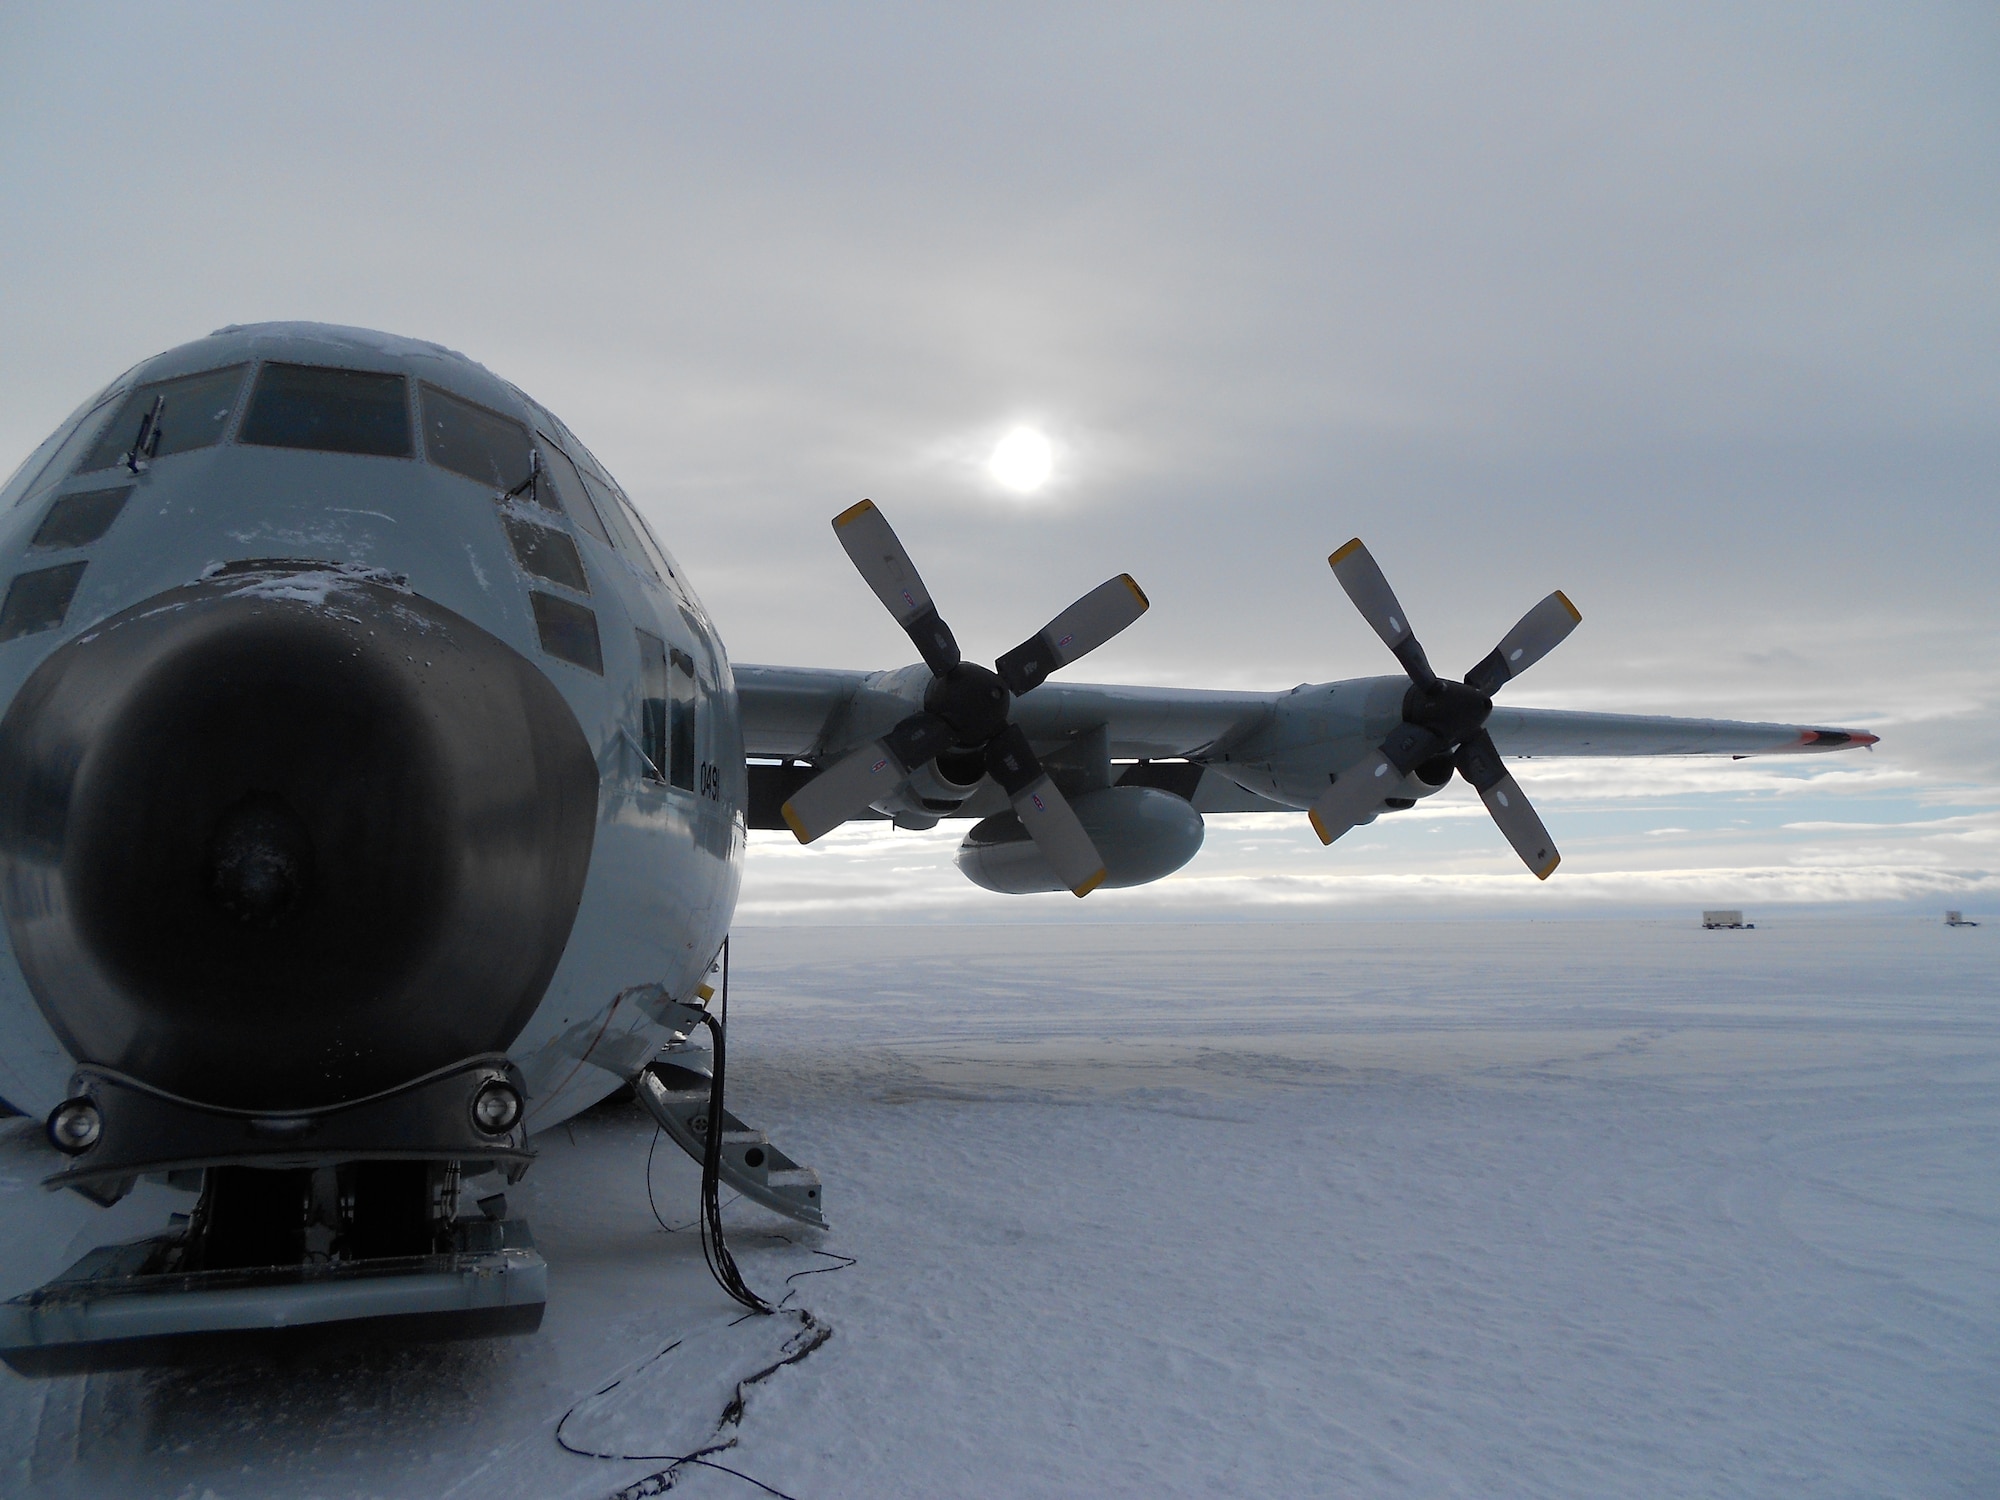 McMURDO STATION, Antarctica--An LC-130 Skibird waits on the ice at McMurdo Station, Antarctica November 21 after returning from a scheduled Operation Deep Freeze re-supply mission to Amundsen-Scott South Pole Station. Operation Deep Freeze provides airlift support to the National Science Foundation, which manages the United States Antarctic Program.